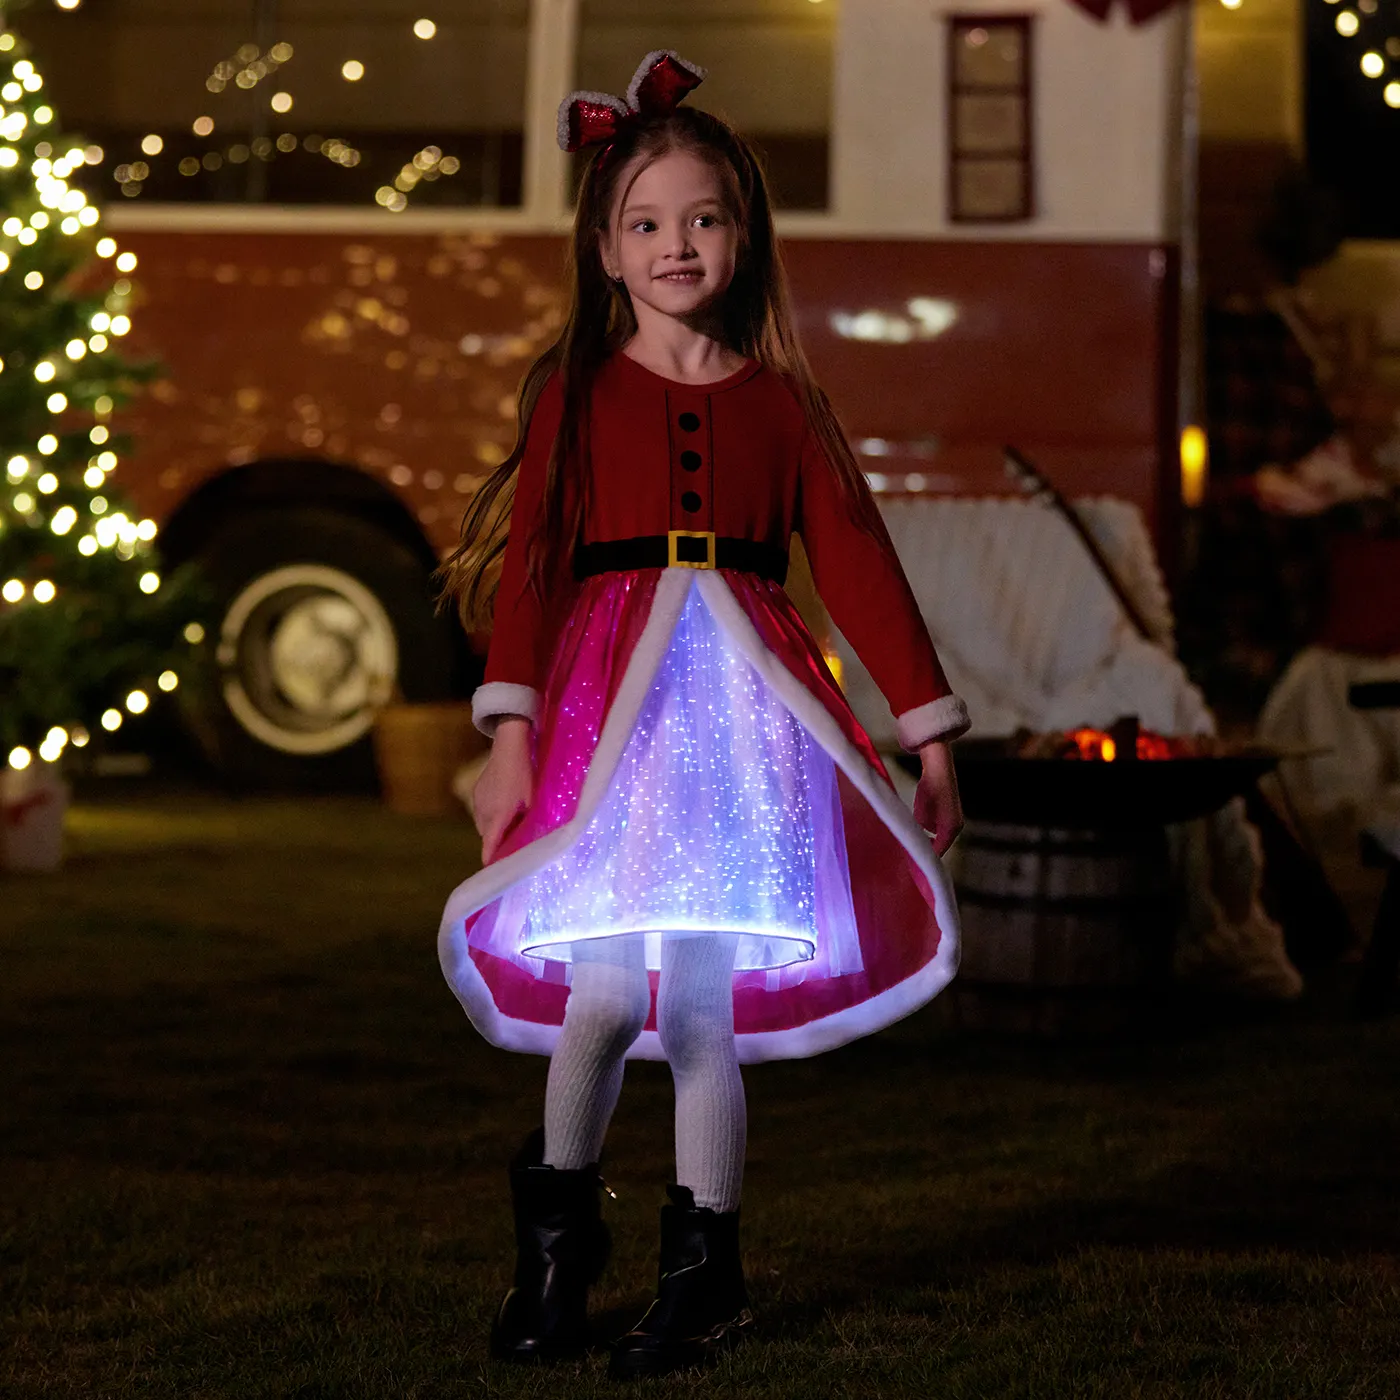 Go-Glow Christmas Family Matching Long-sleeve Tops With Santa Embroidery Glowing & Illuminating Dress With Light Up Skirt Including Controller (Built-